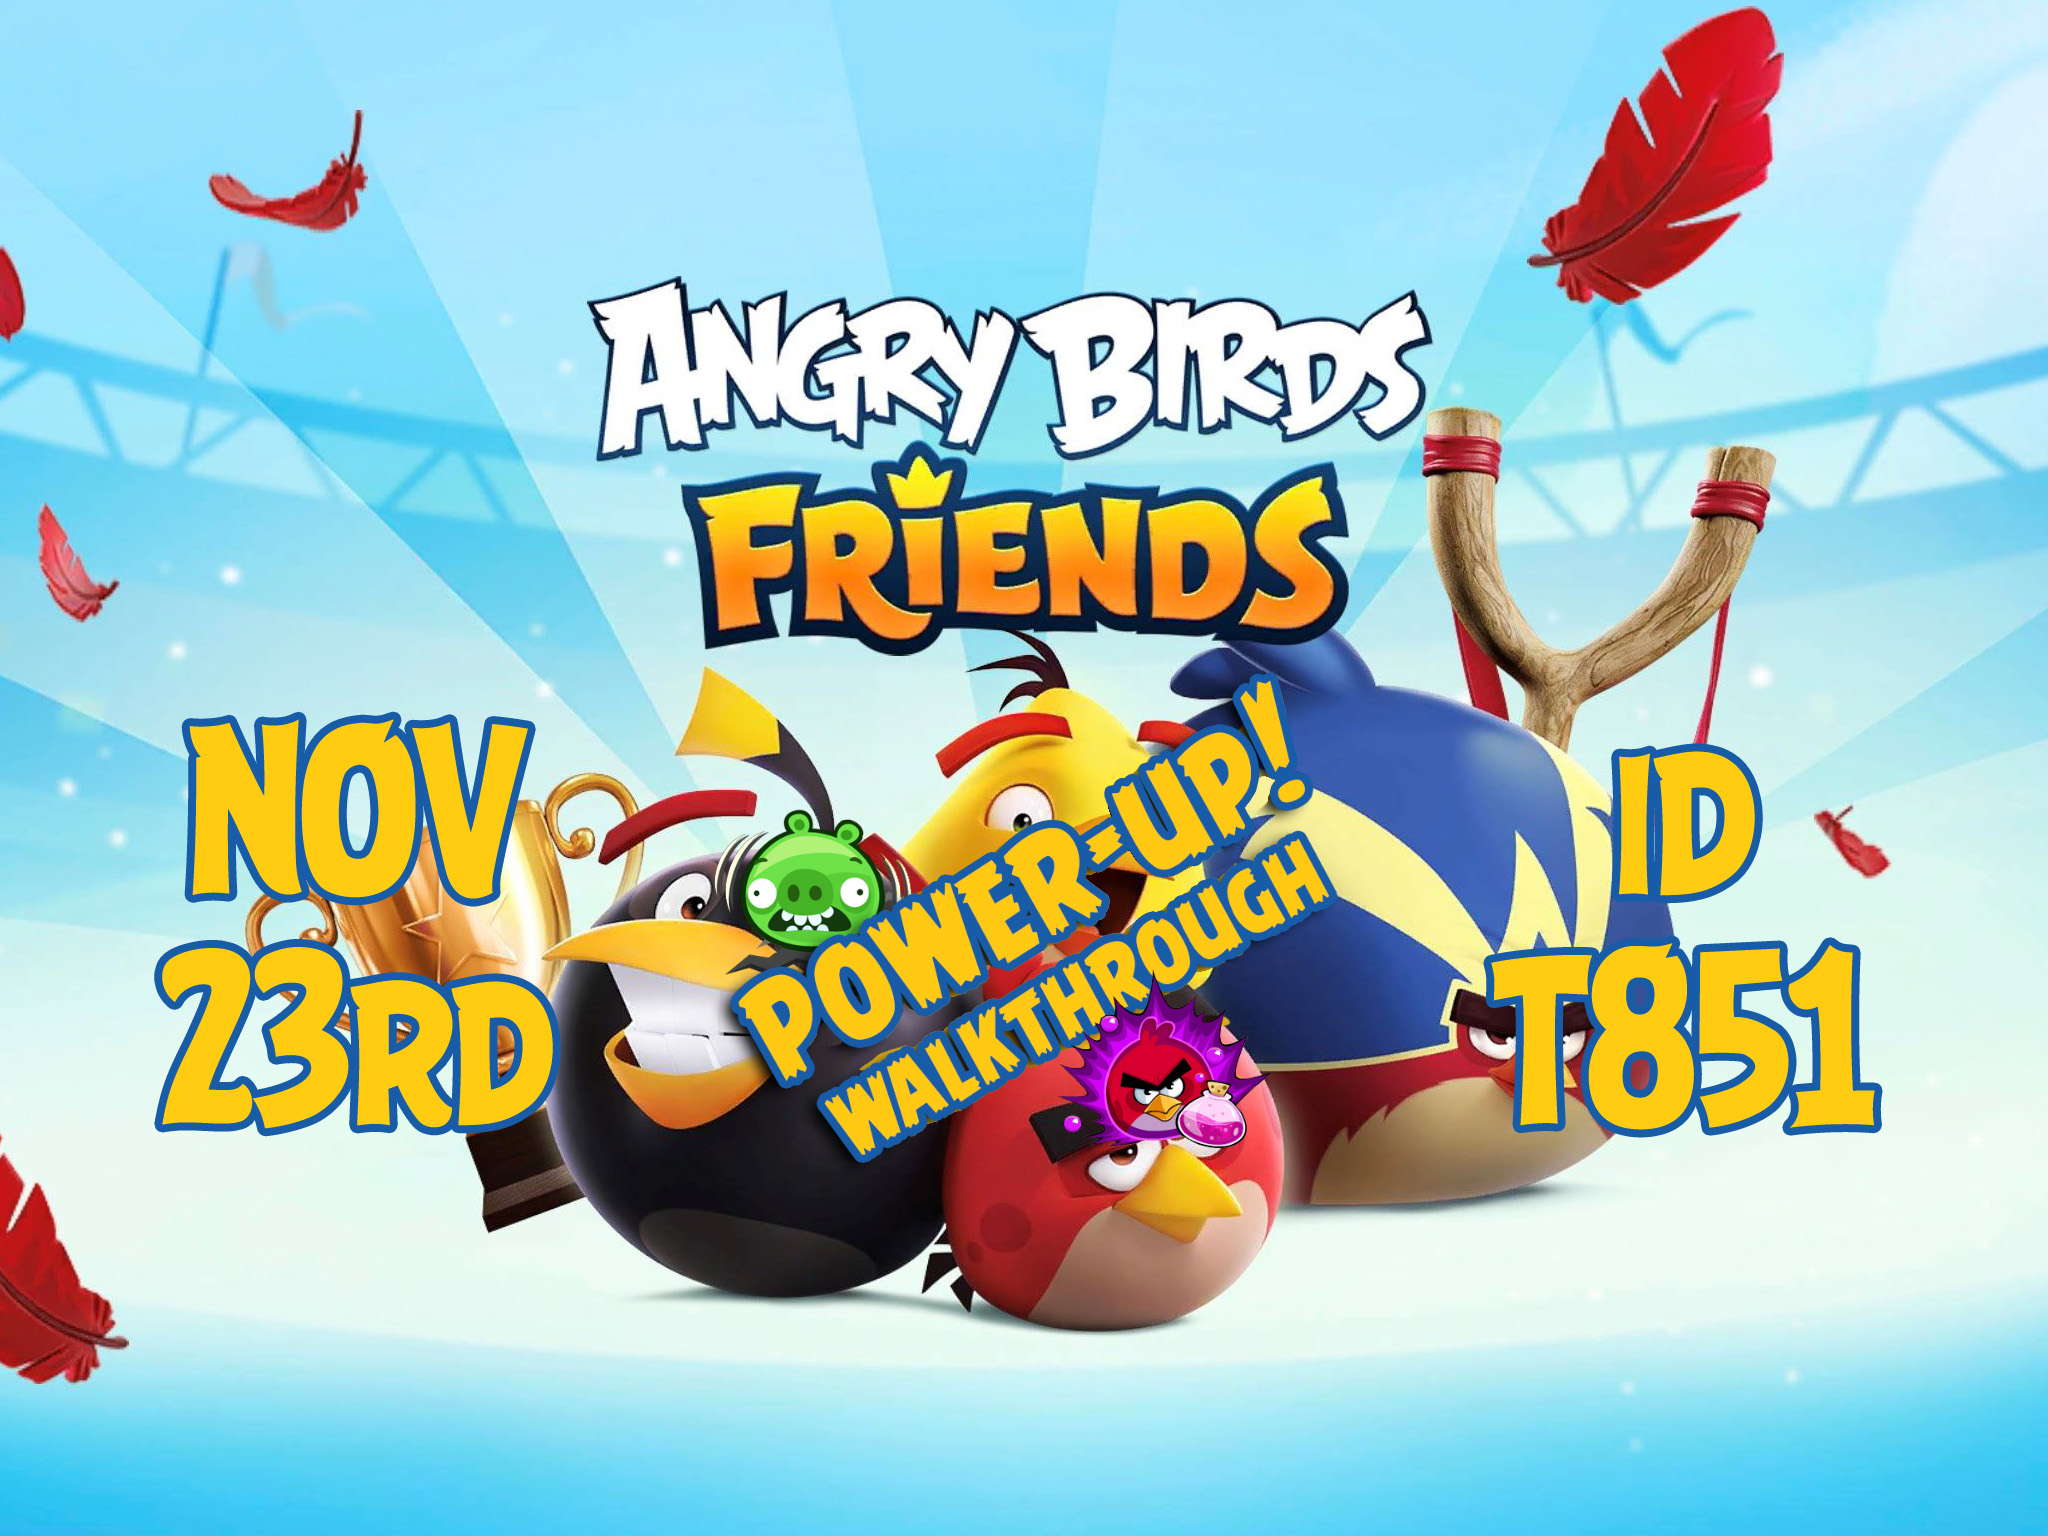 Angry-Birds-Friends-Tournament-T851-Feature-Image-PU